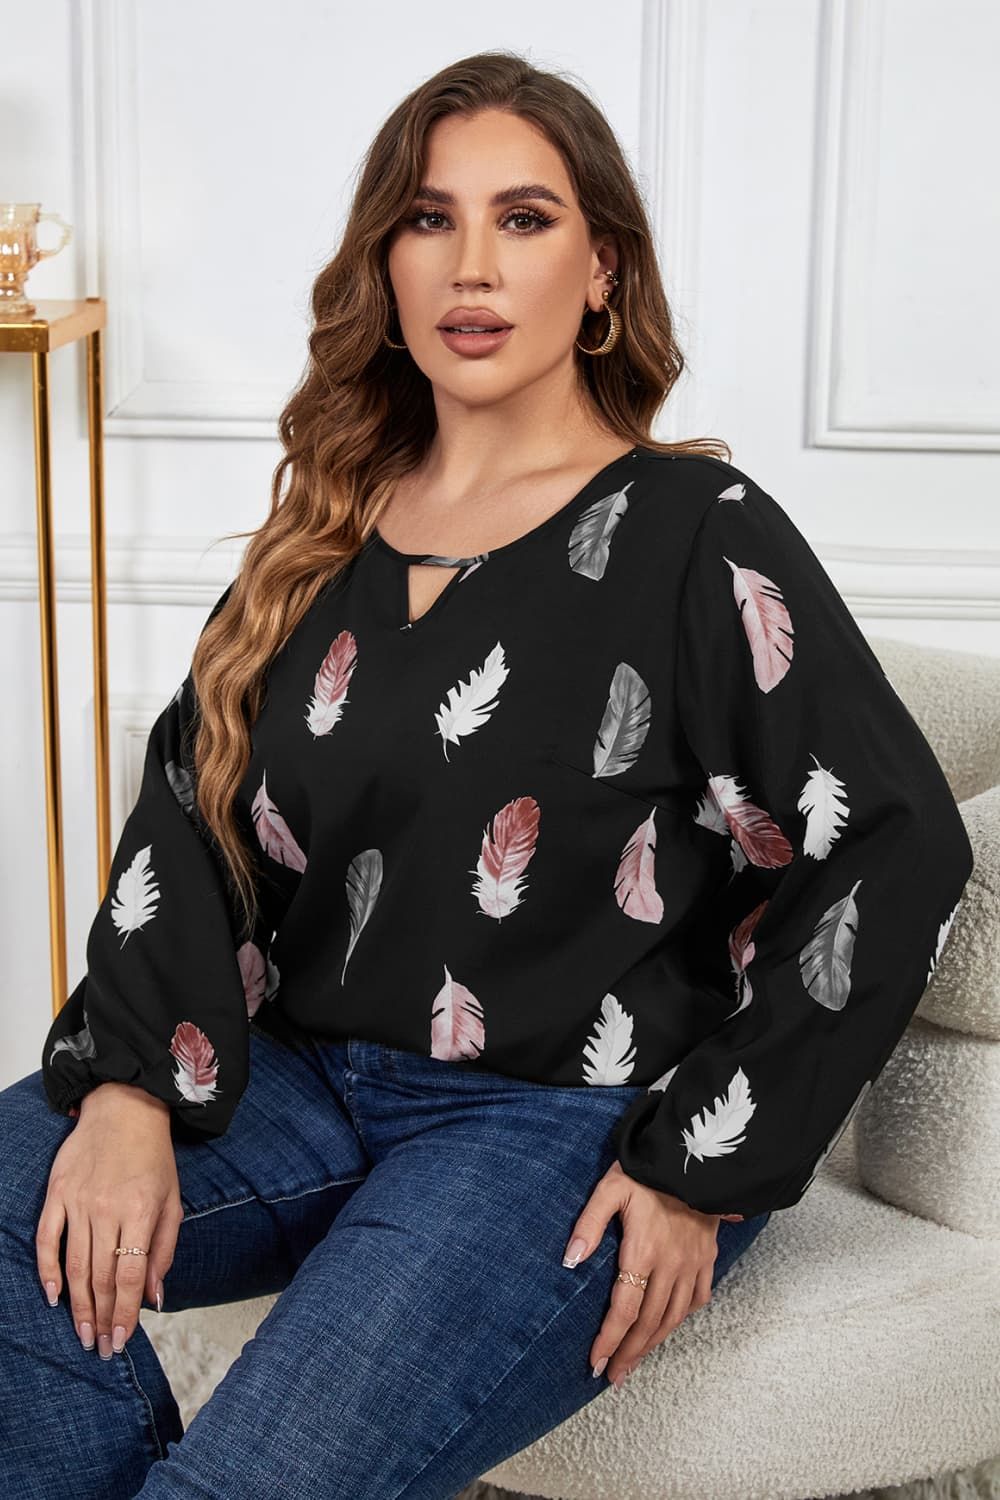 Melo Apparel Plus Size Printed Round Neck Long Sleeve Cutout Blouse.